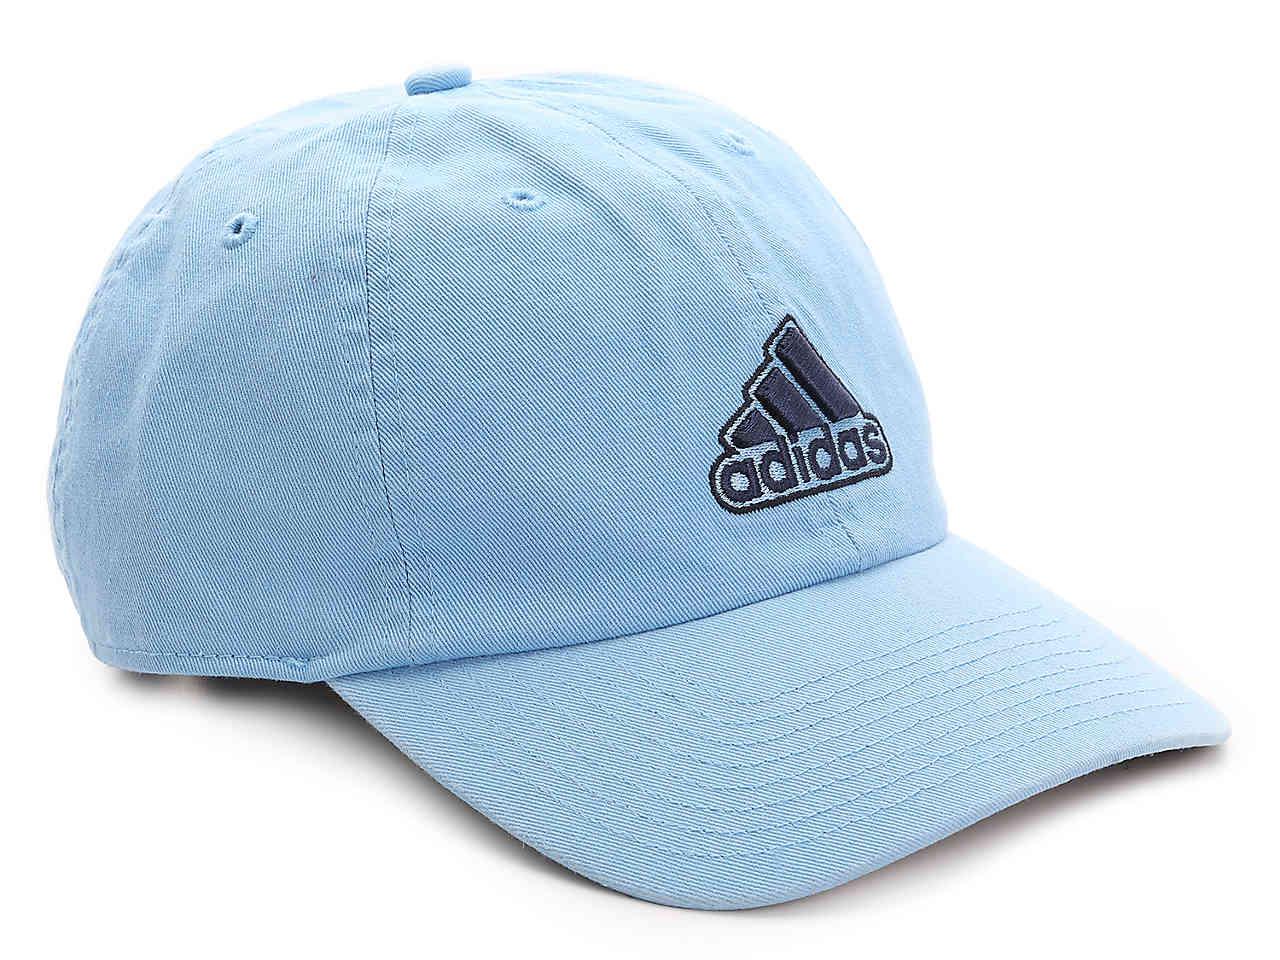 adidas men's ultimate relaxed cap